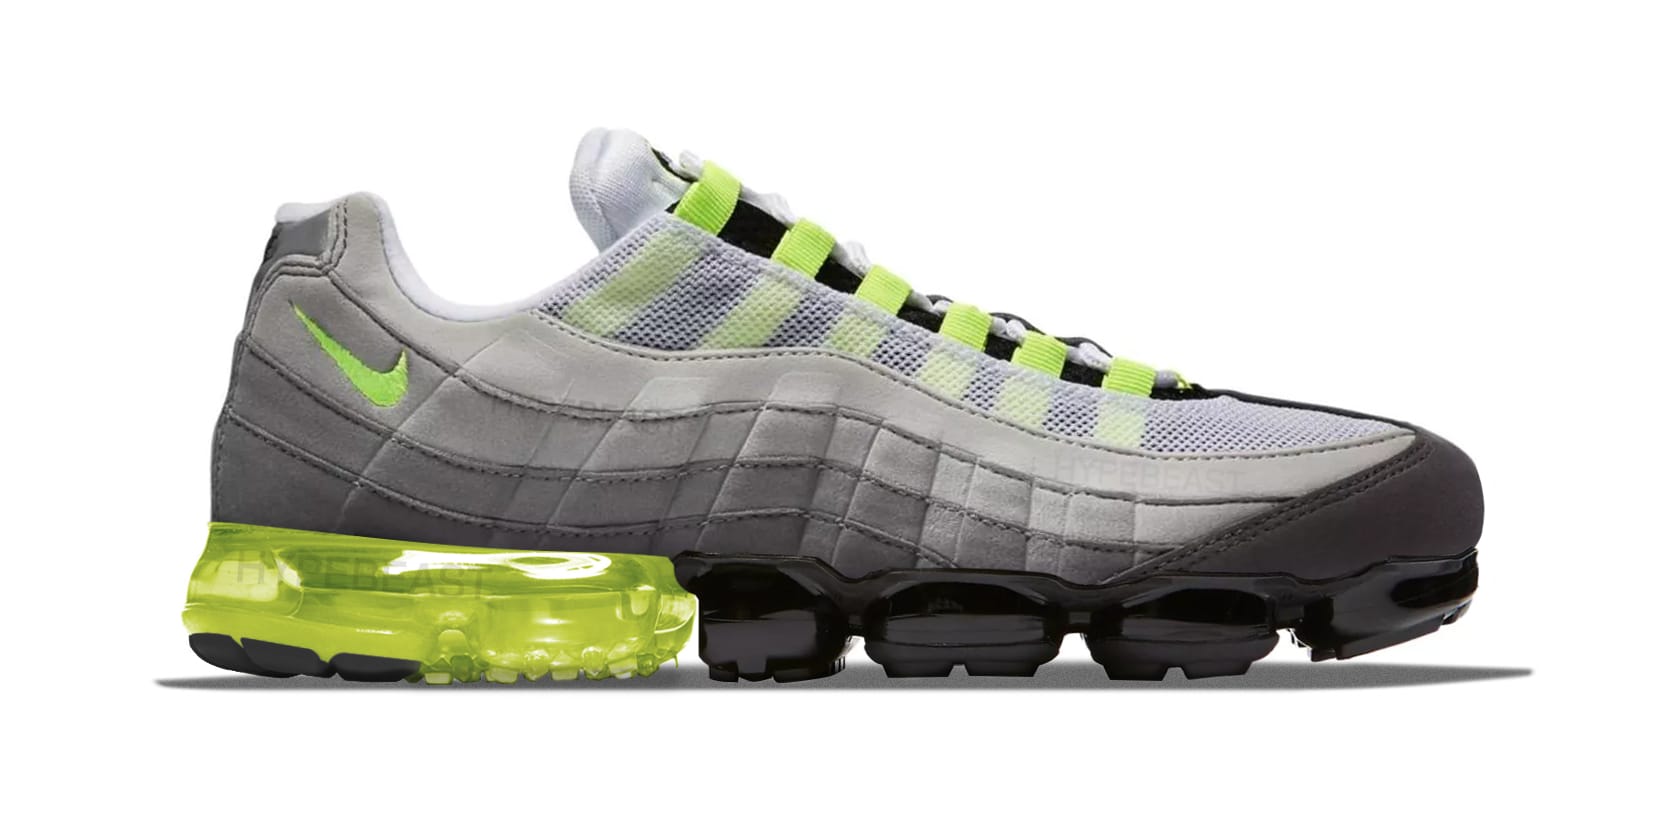 Nike Air Max 95 x VaporMax Hybrid Images Surface | HYPEBEAST